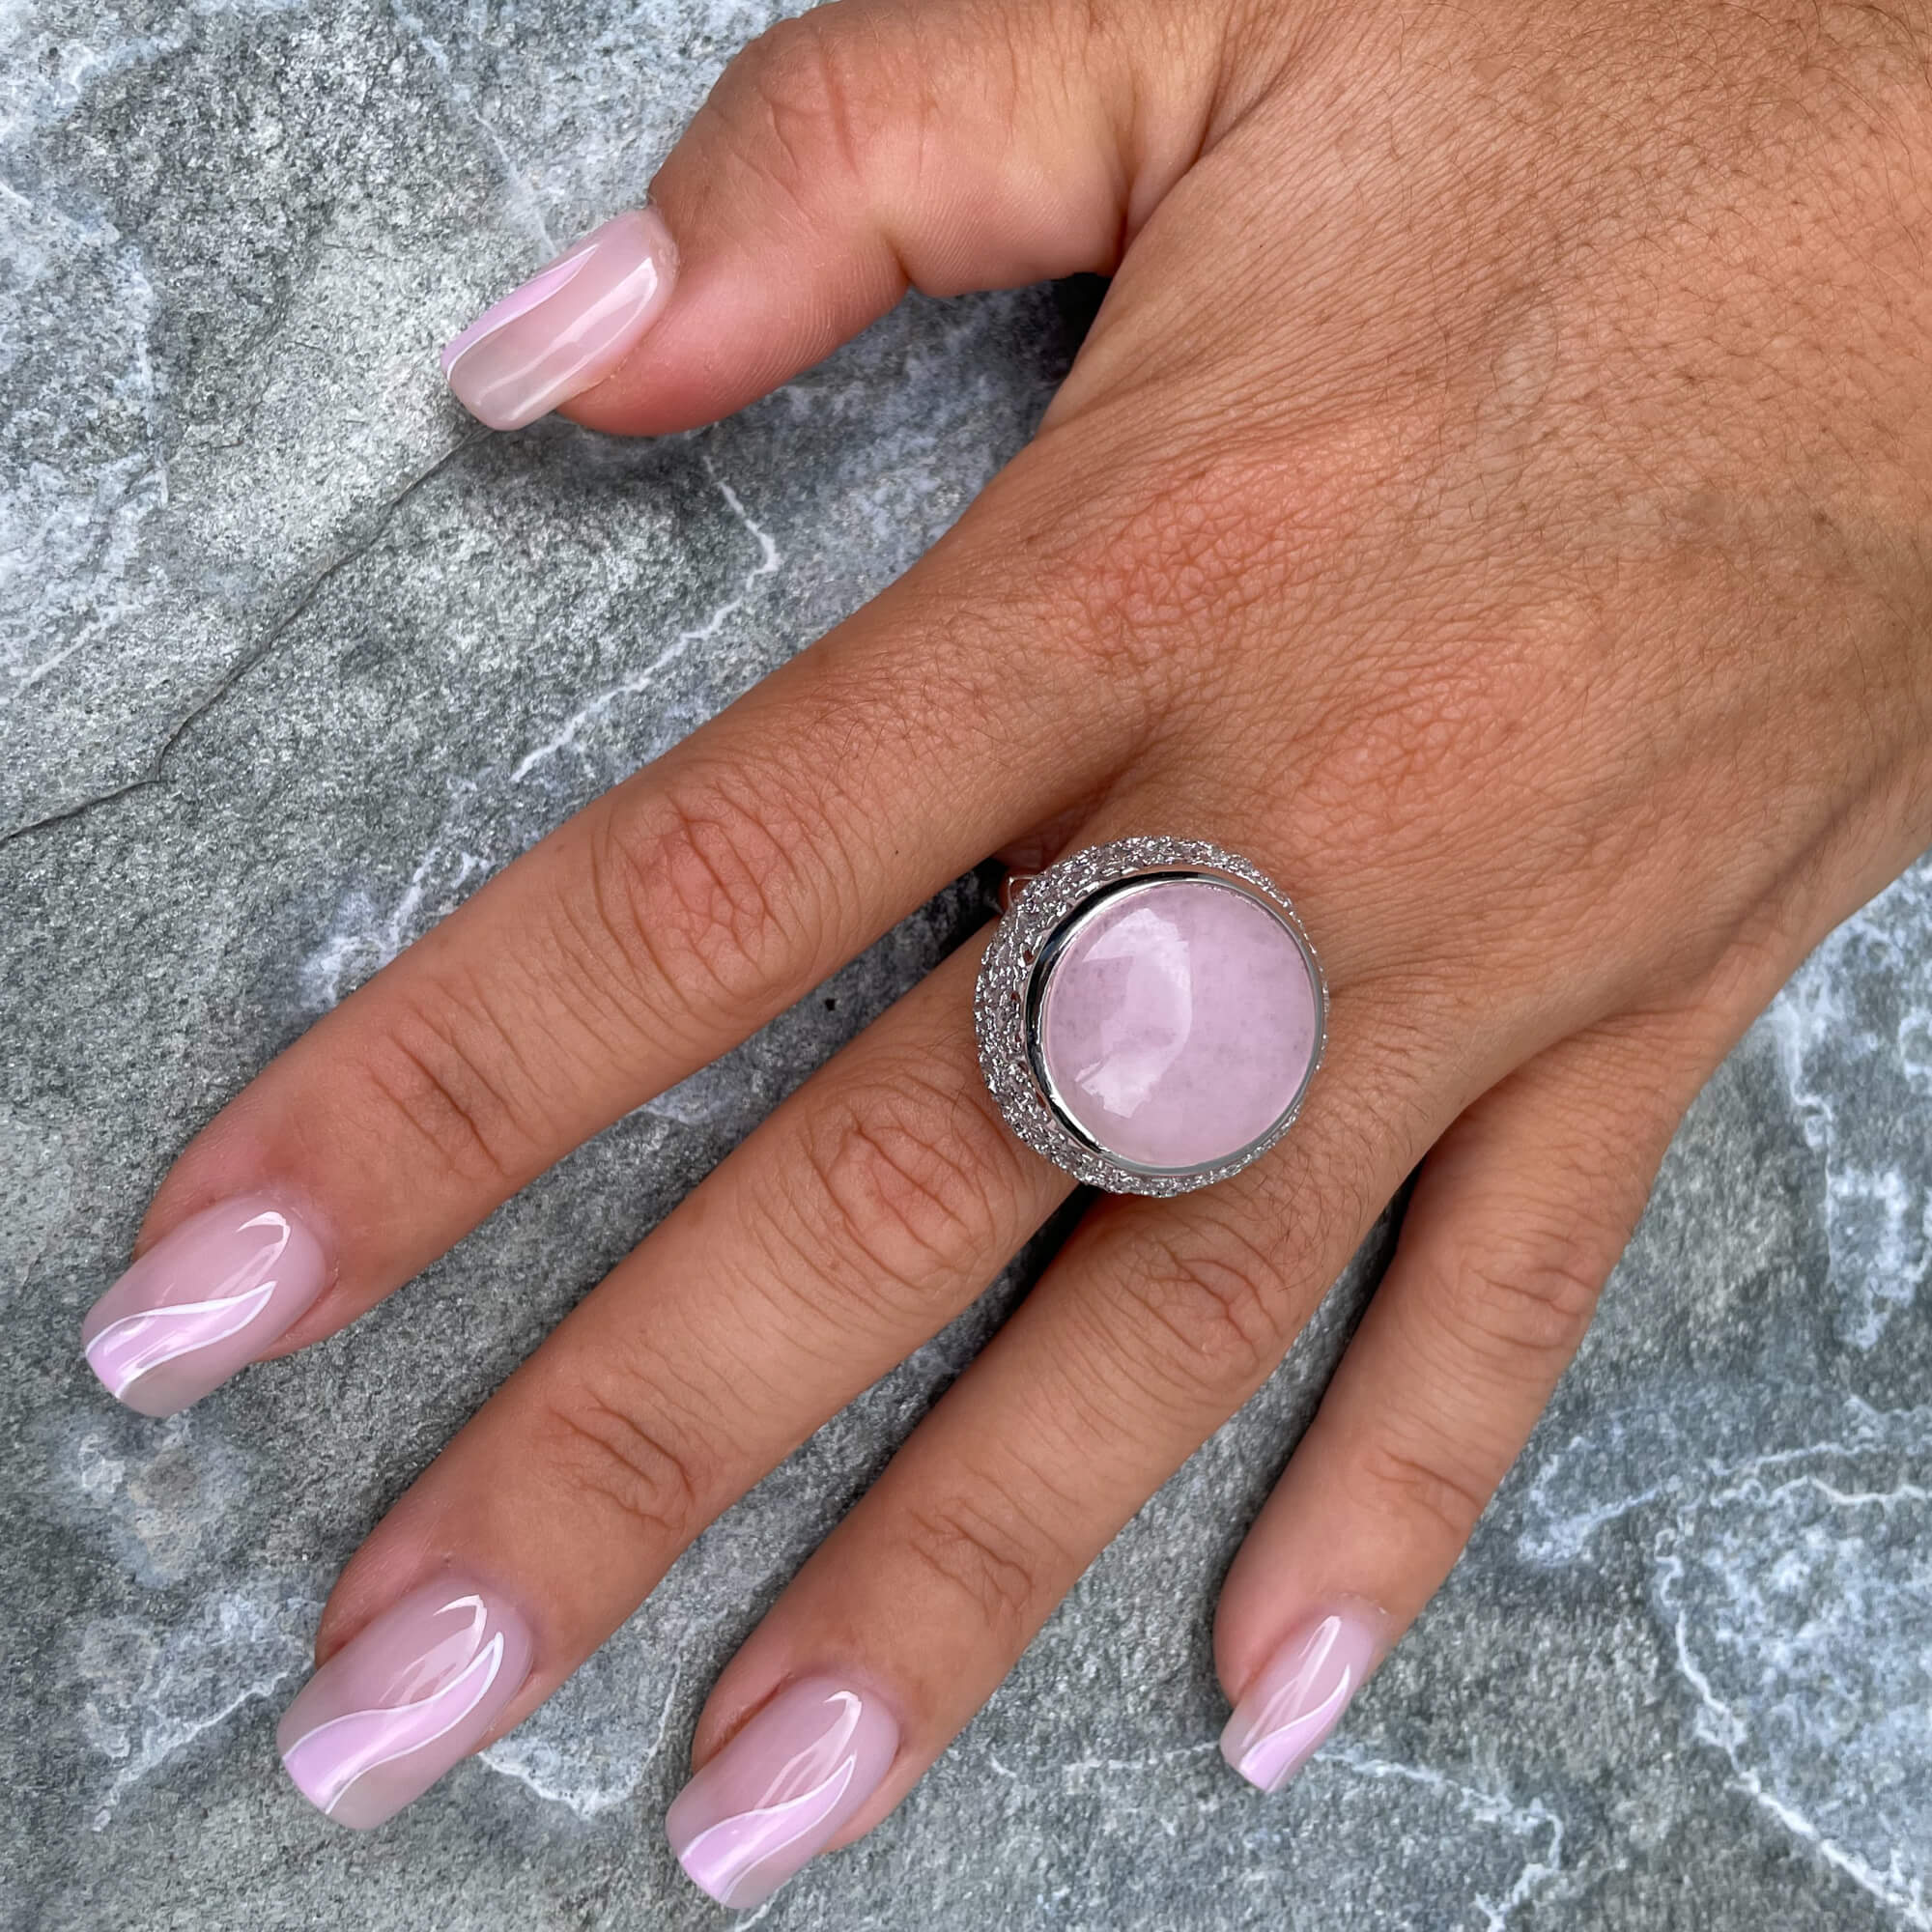 Edited silver ring with a pink quartz stone